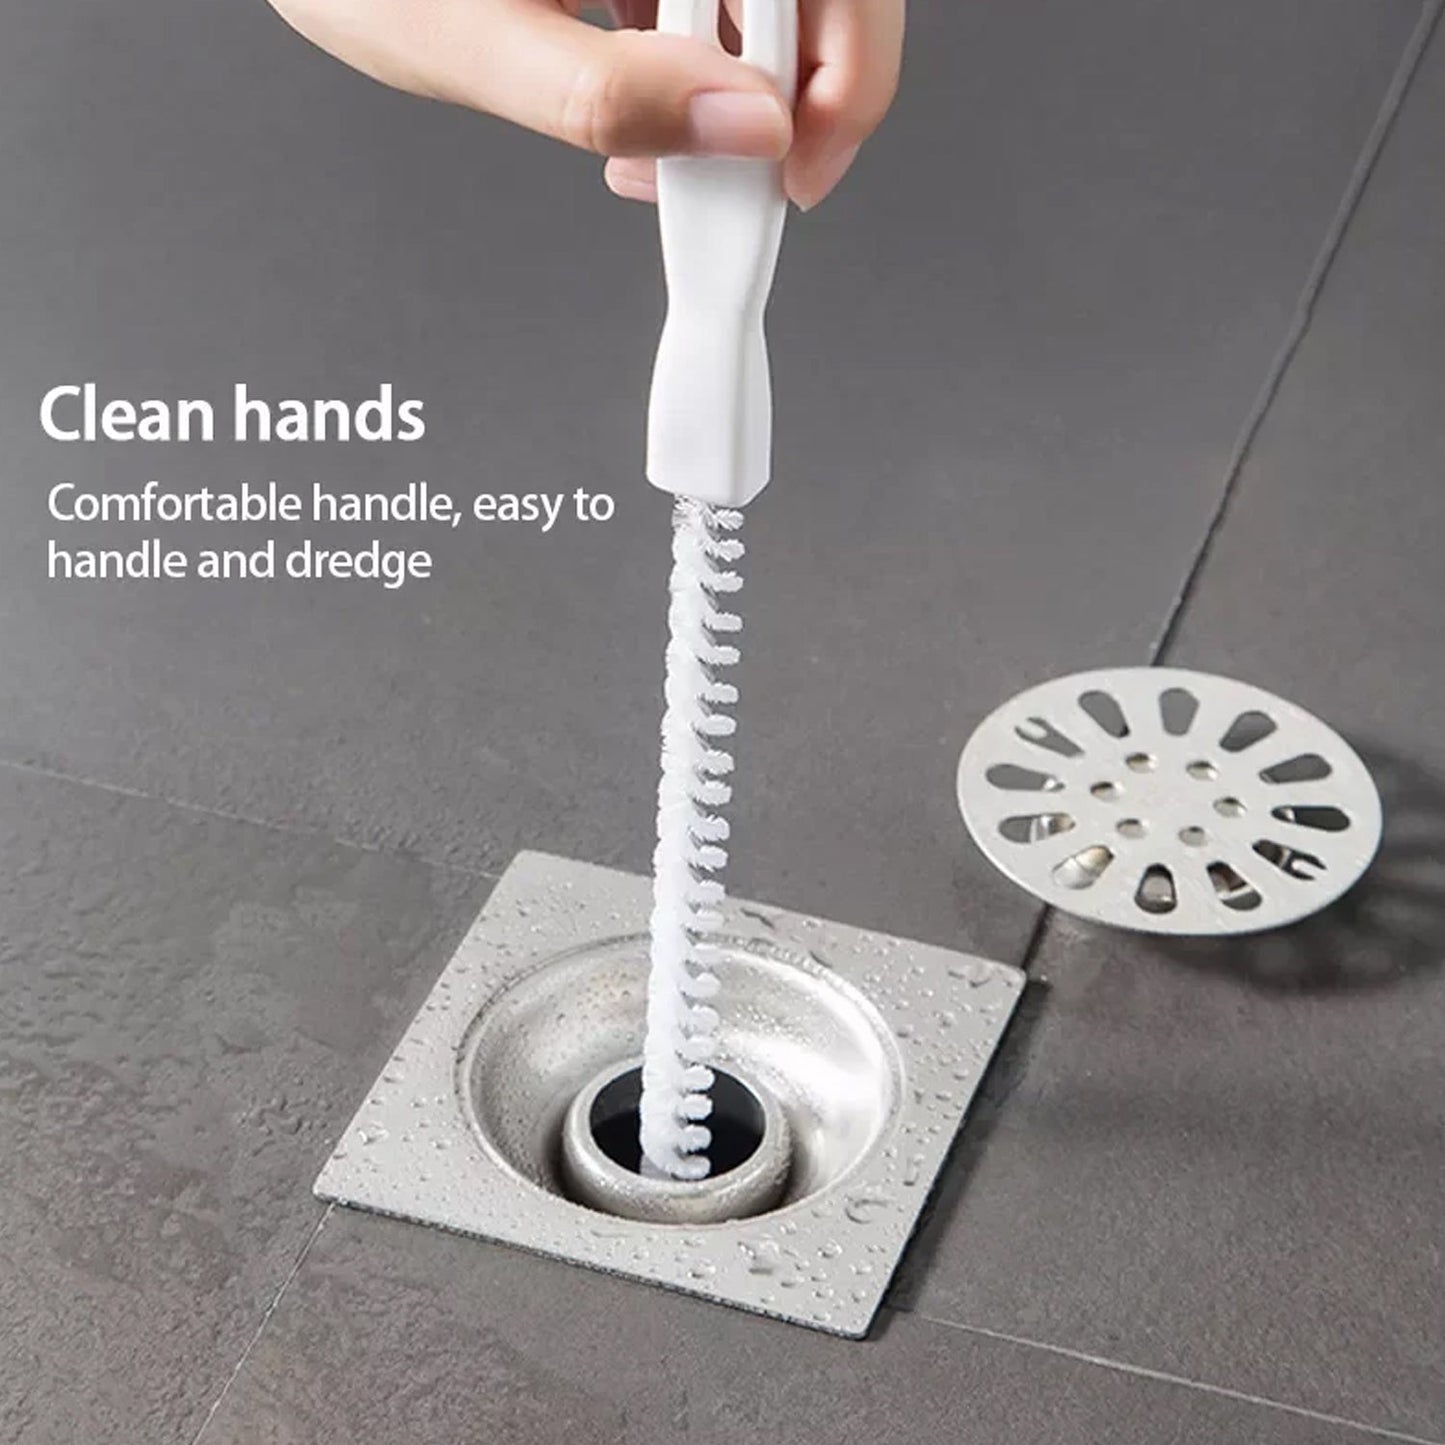 1630 Sewer Dredging Tool, Sink Drain Overflow Cleaning Brush, Household Sewer Hair Catcher, Reusable Drain Cleaner Hair Clog Remover with Easy Operation for Sewer/Kitchen/Showers (1 Pc 47 Cm)